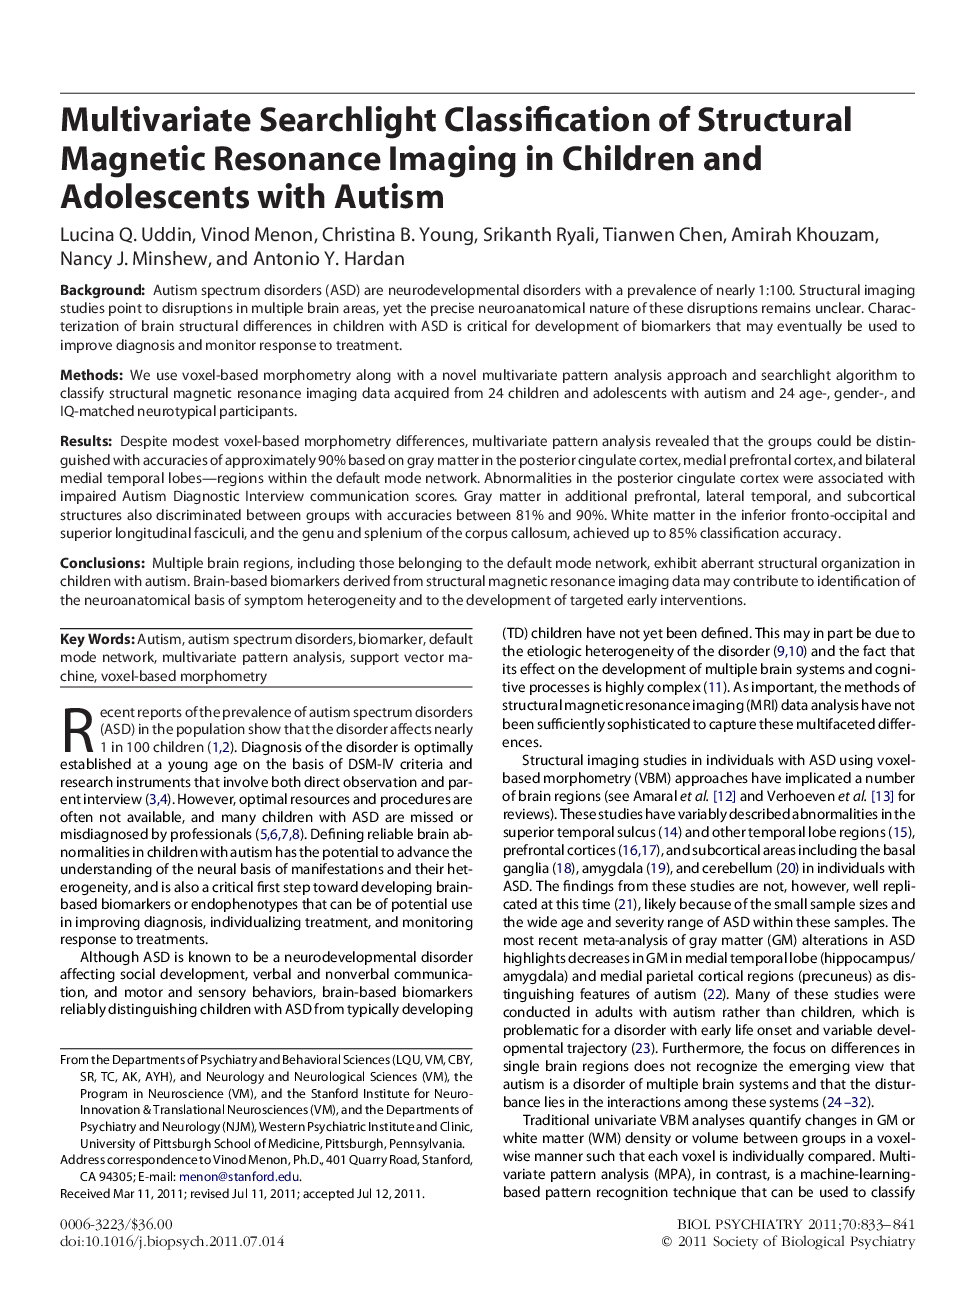 Multivariate Searchlight Classification of Structural Magnetic Resonance Imaging in Children and Adolescents with Autism